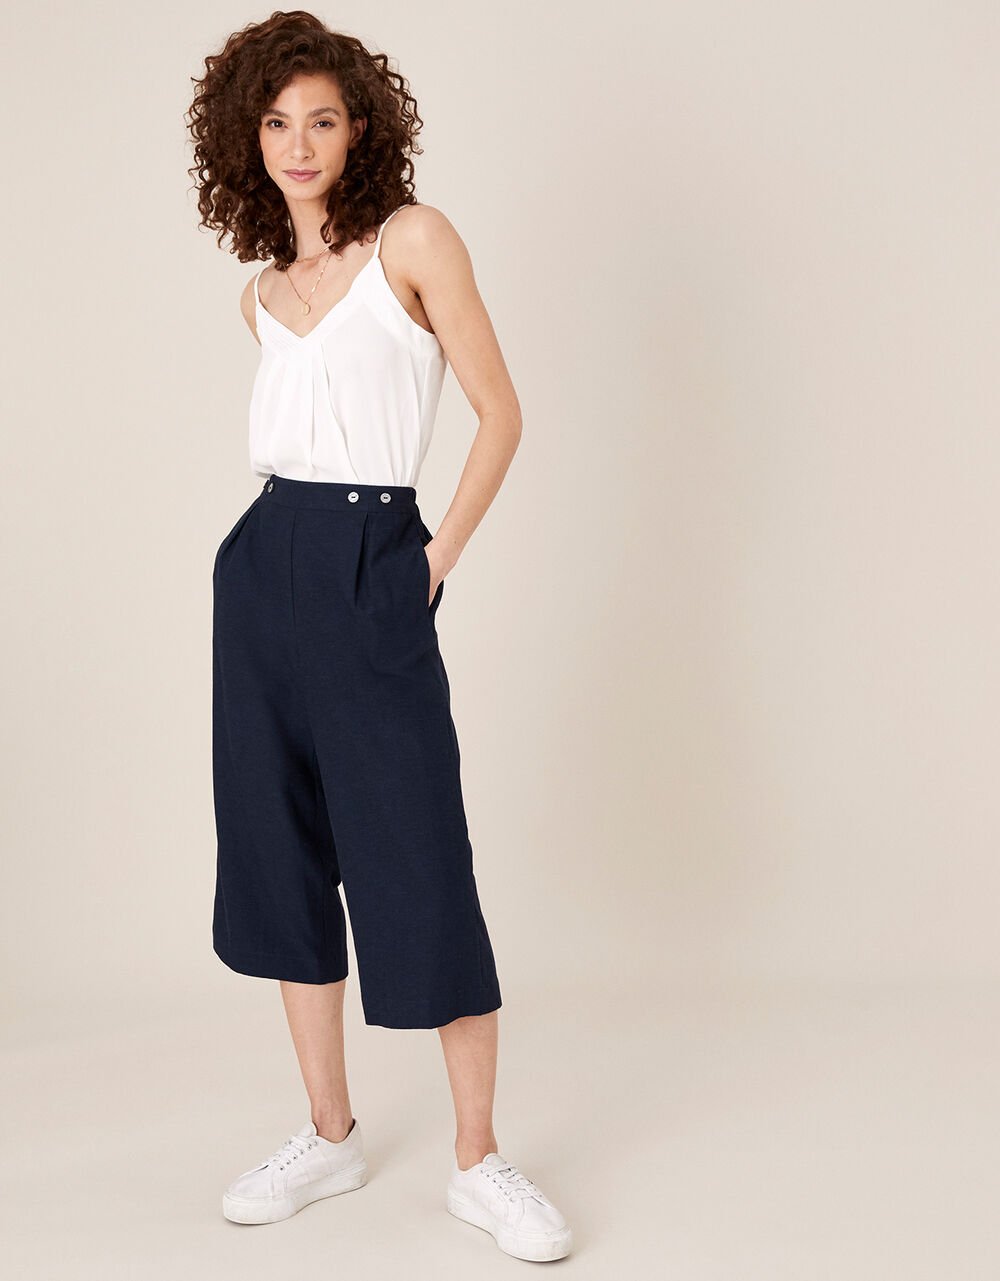 Women Women's Clothing | Cropped Trousers in Linen Blend Blue - MH36739